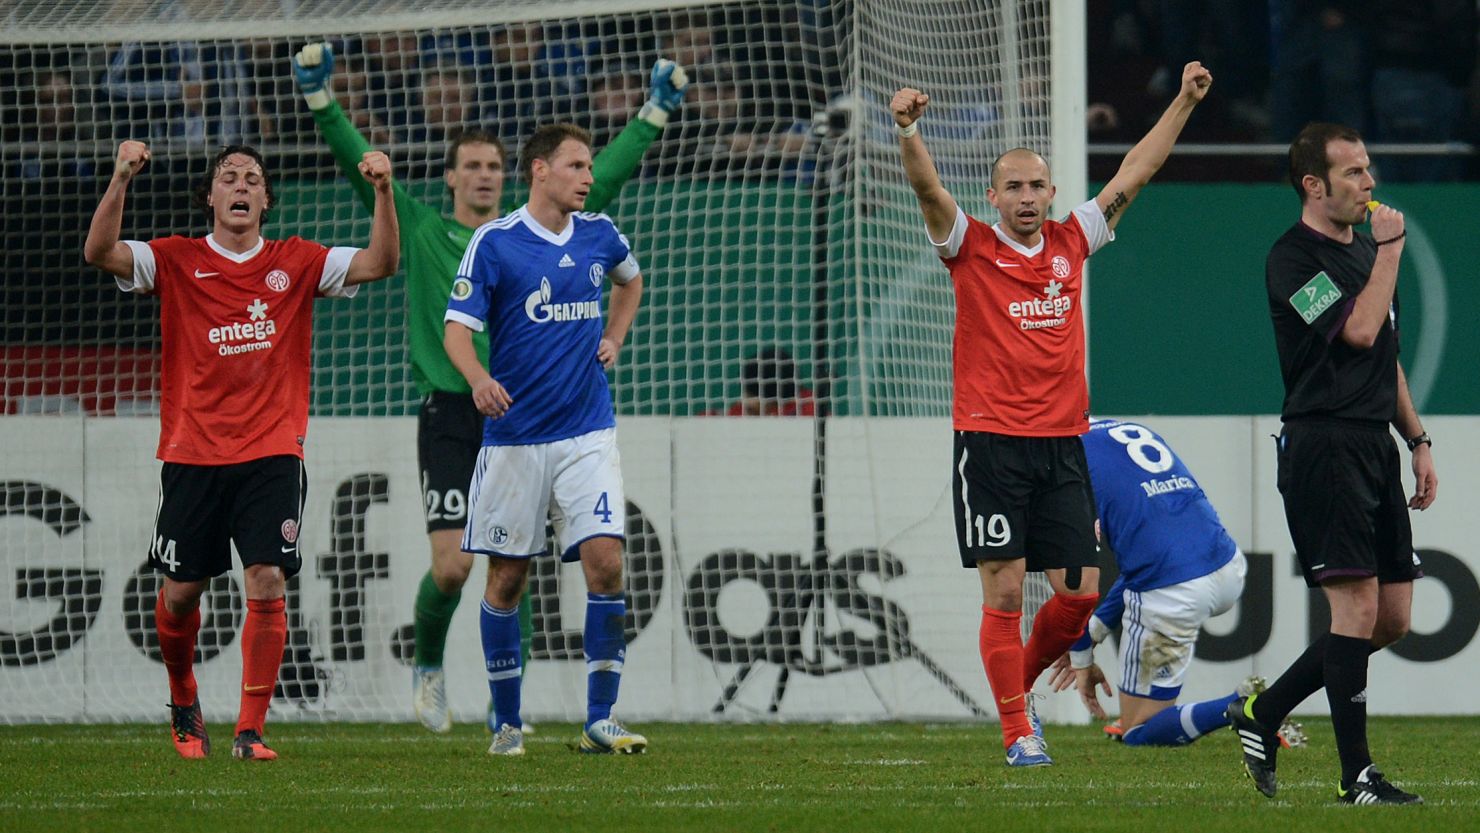 Schalke will not regain the German Cup title they won in 2011 after they were knocked out of the competition by Mainz